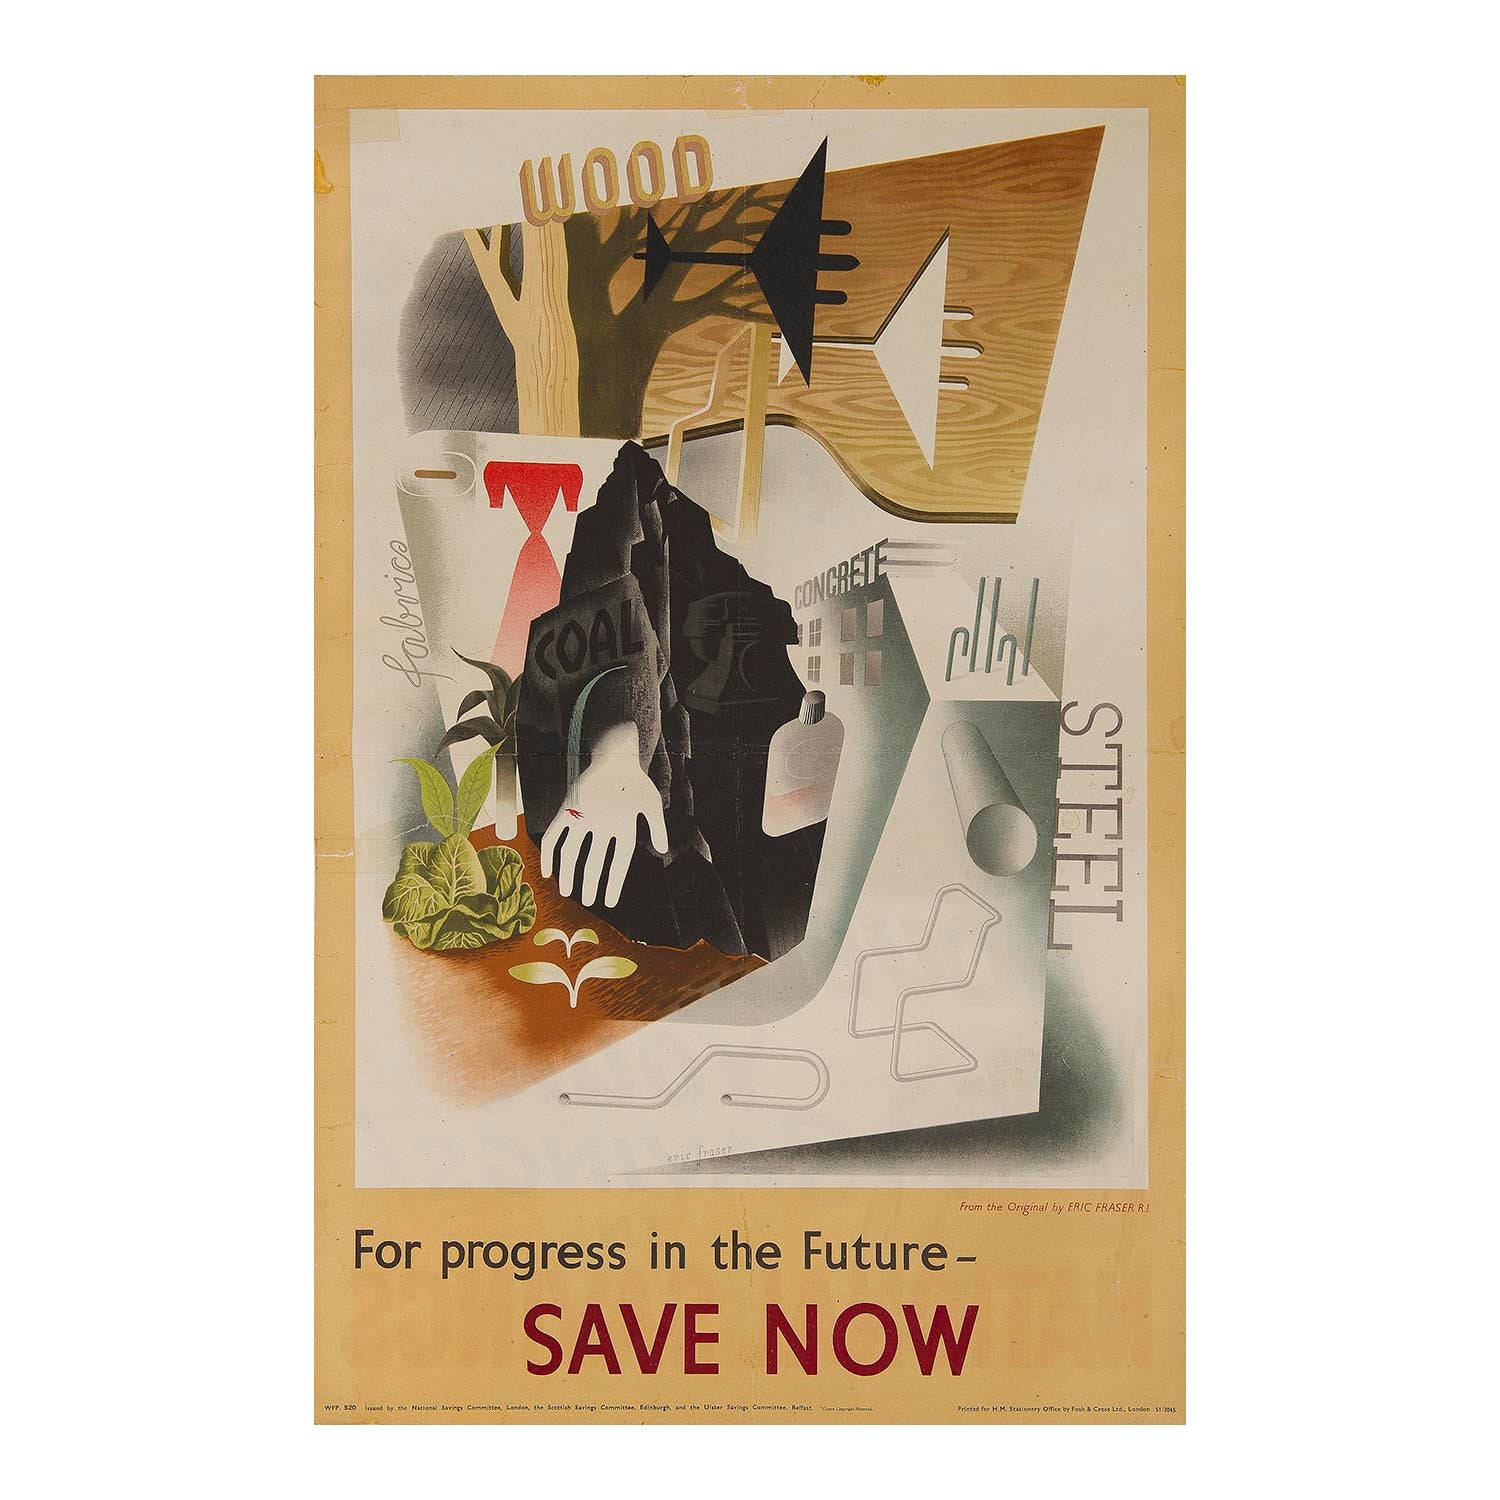 Second World War Home Front poster, For Progress in the Future, Save Now, by Eric Fraser, 1945. The picture is formed of a montage of products made from or relating to wood, fabric, coal, concrete and steel, together with various vegetables.